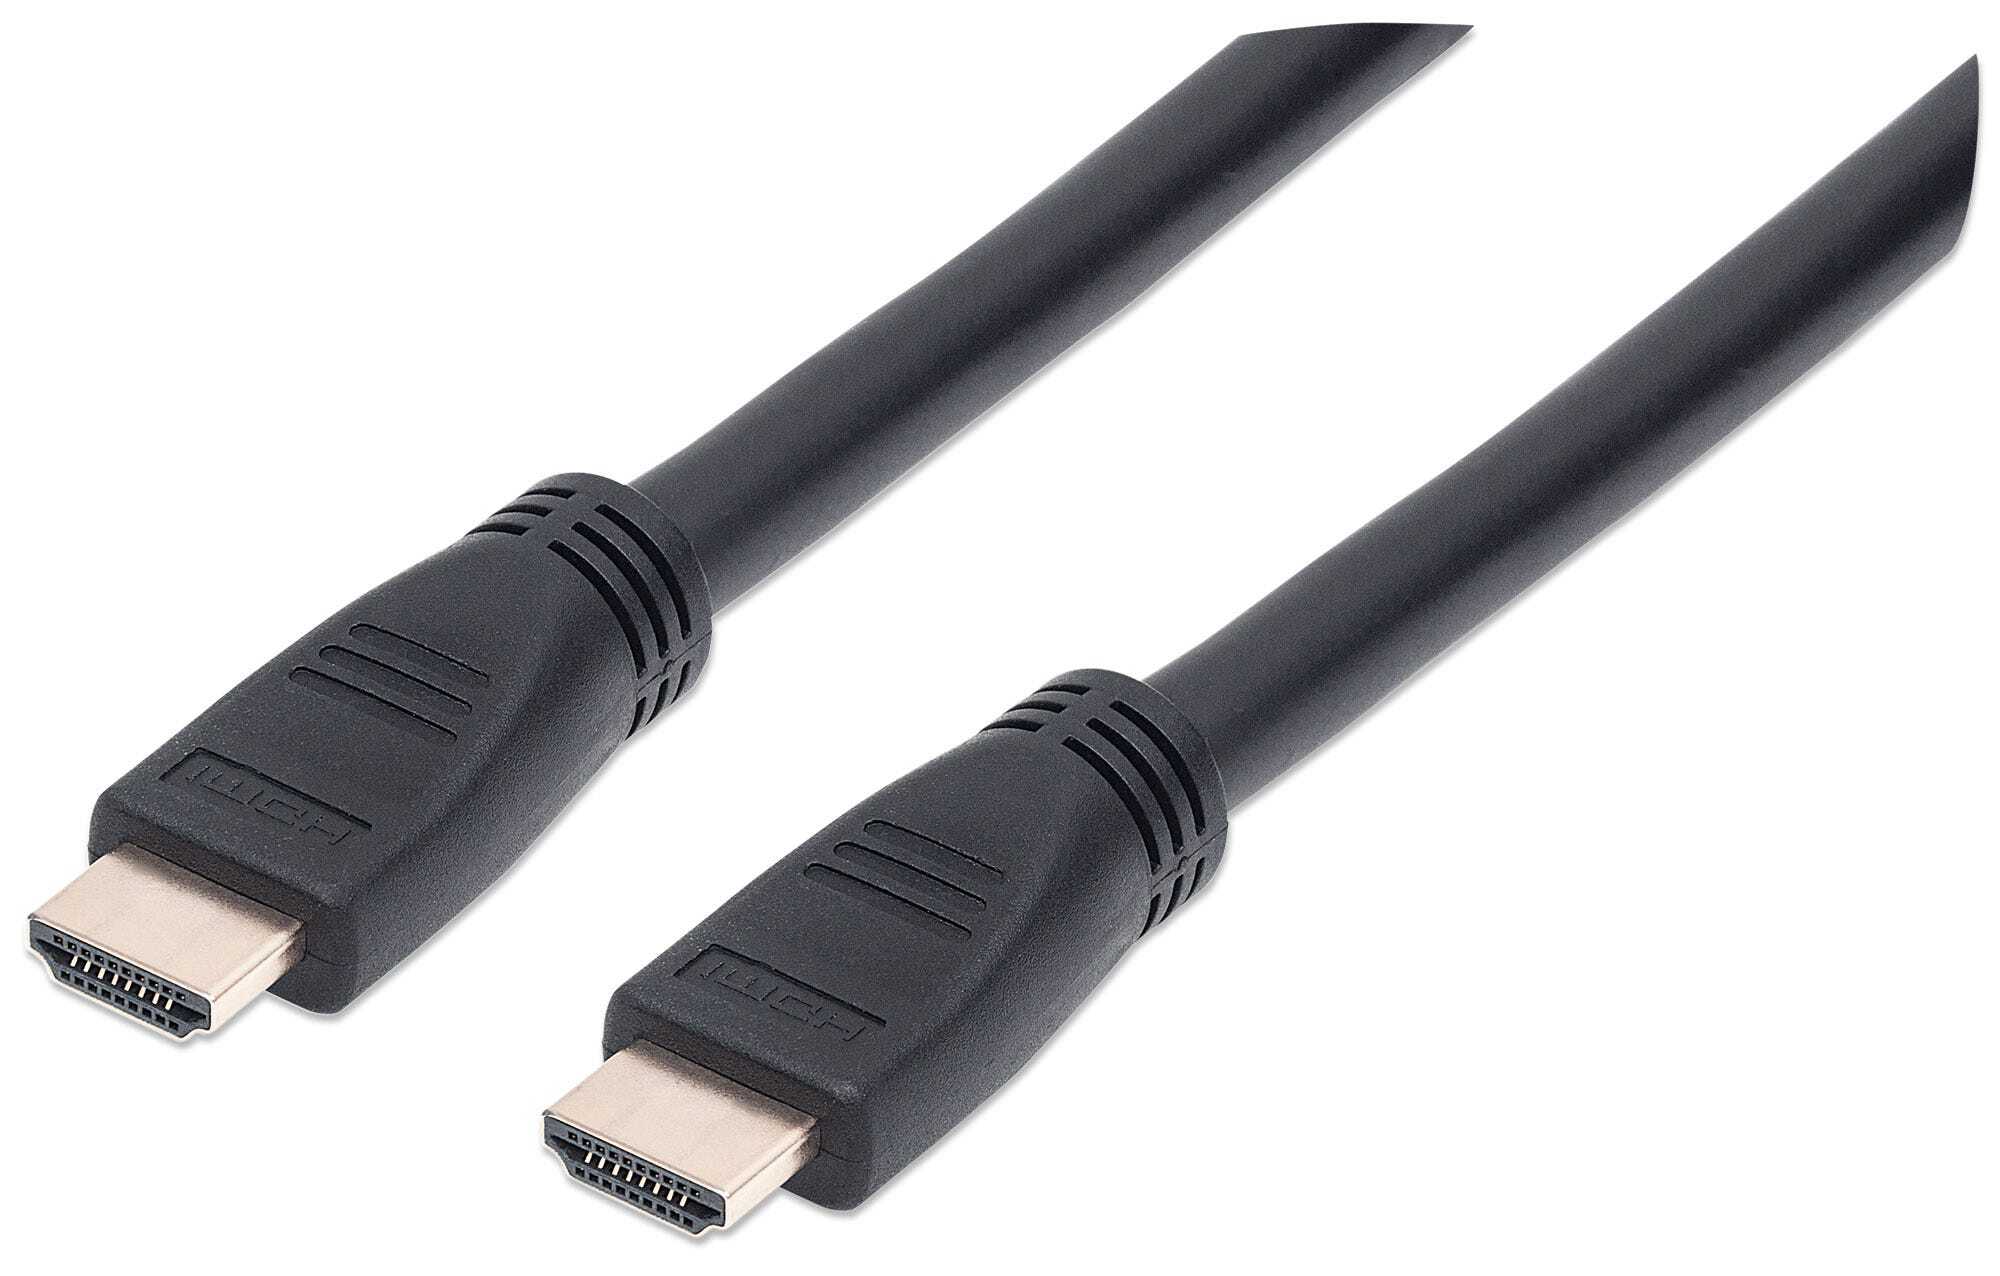 MANHATTAN HDMI In-Wall CL3 Cable with Ethernet, 4K, Male to Male, 10m, 4K@60Hz, HEC, ARC, 3D, In-Wall rated, Shielded, Black, Polybag